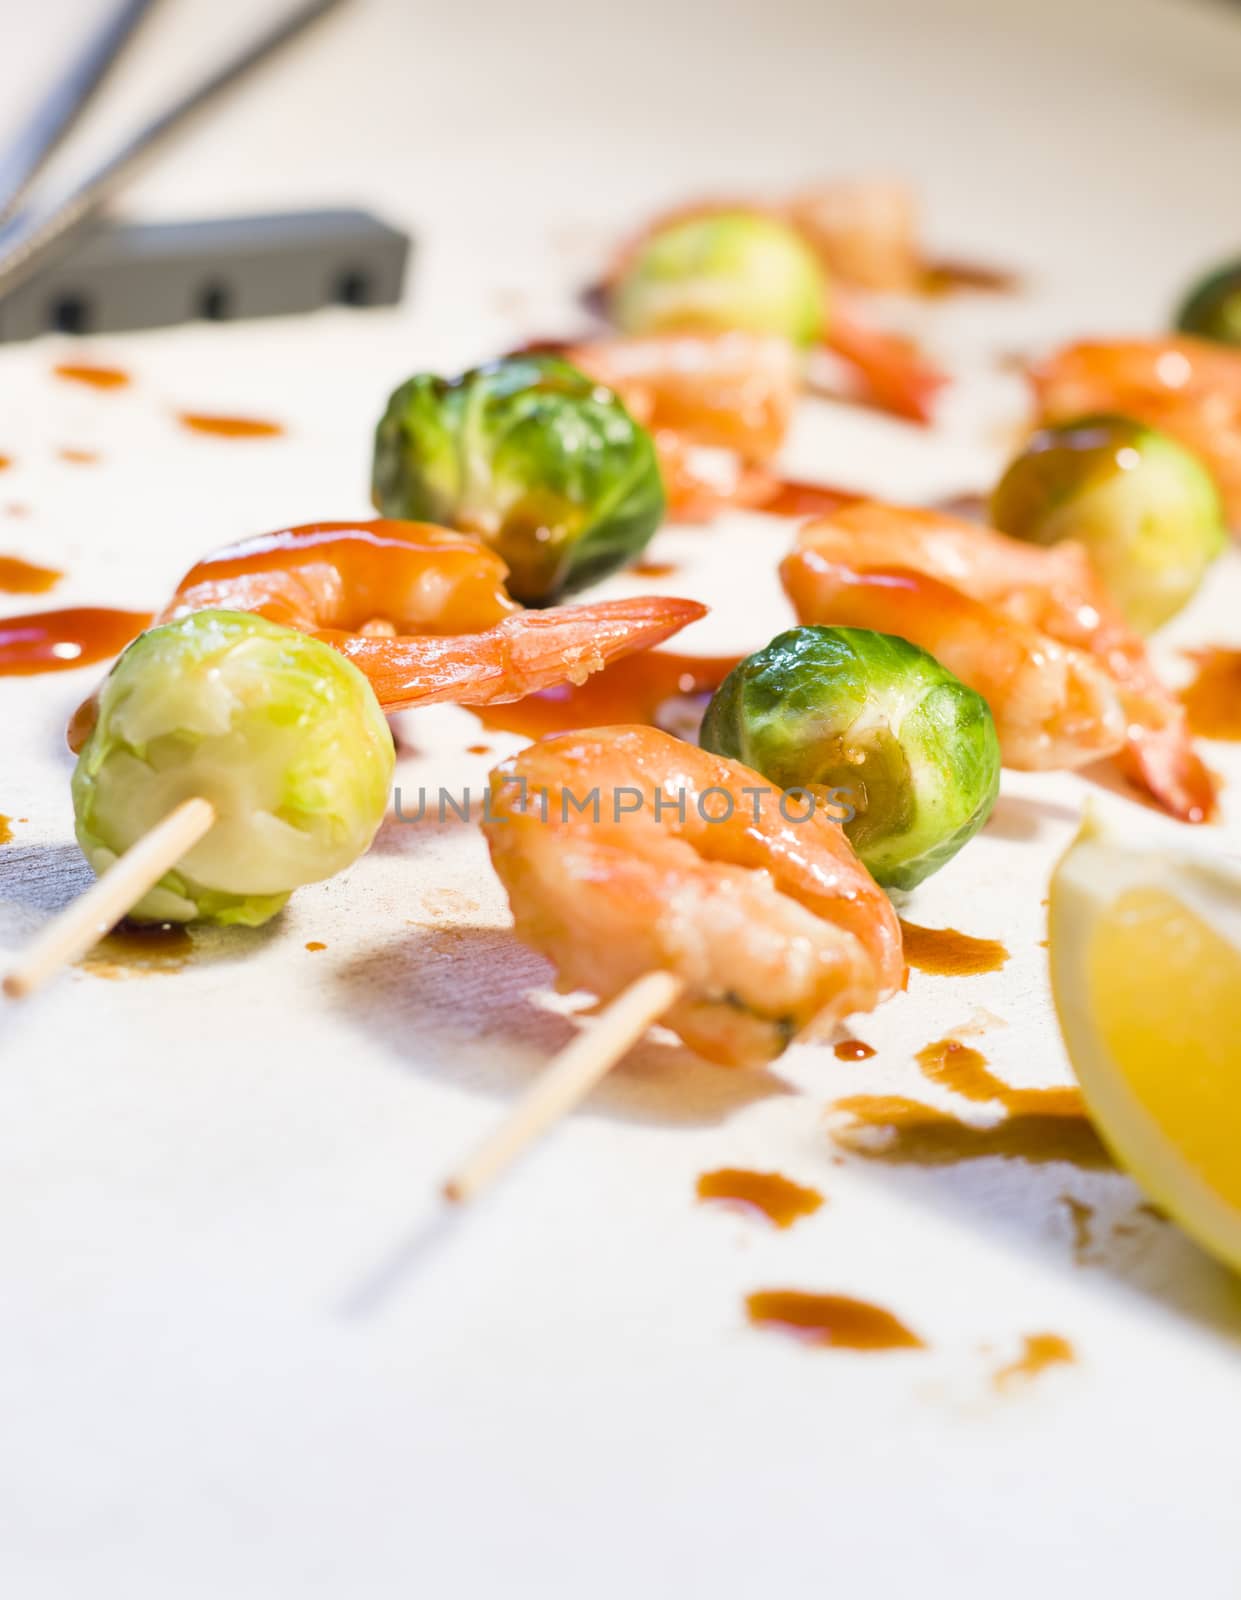 shrimps and vegetables on the table, ready to eat, souse and delishes food. Studio shot.